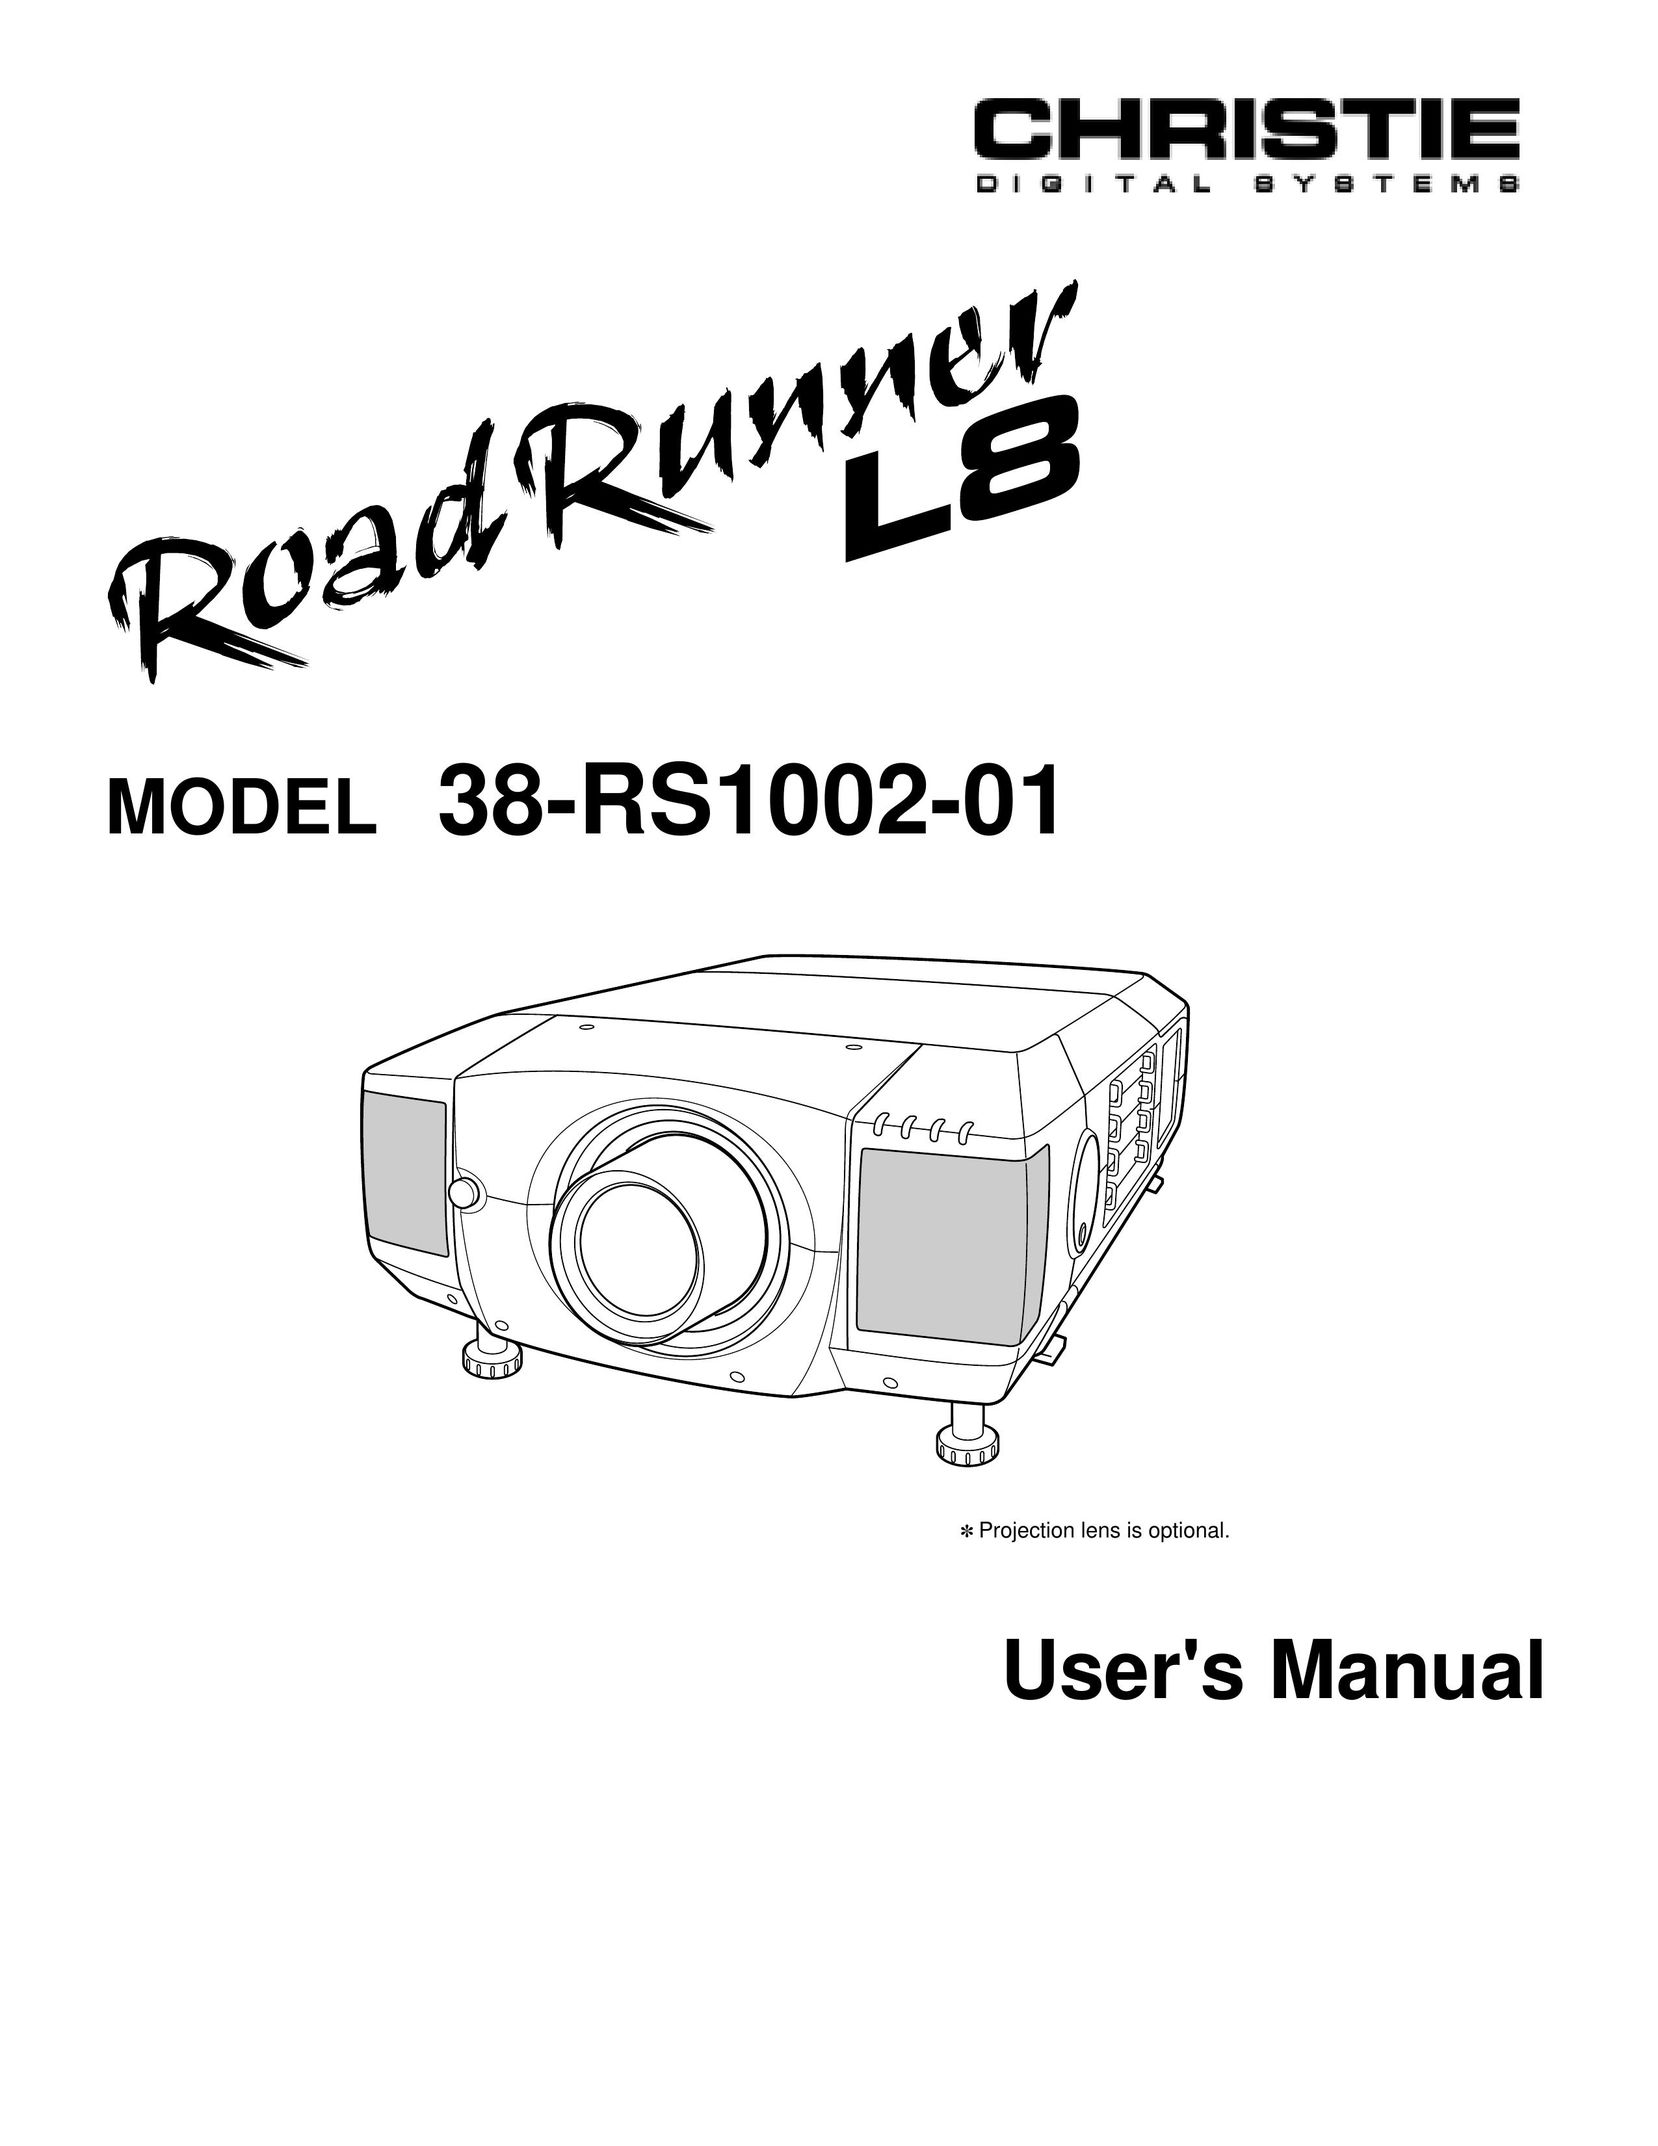 Christie Digital Systems 38-RS1002-01 Projector User Manual